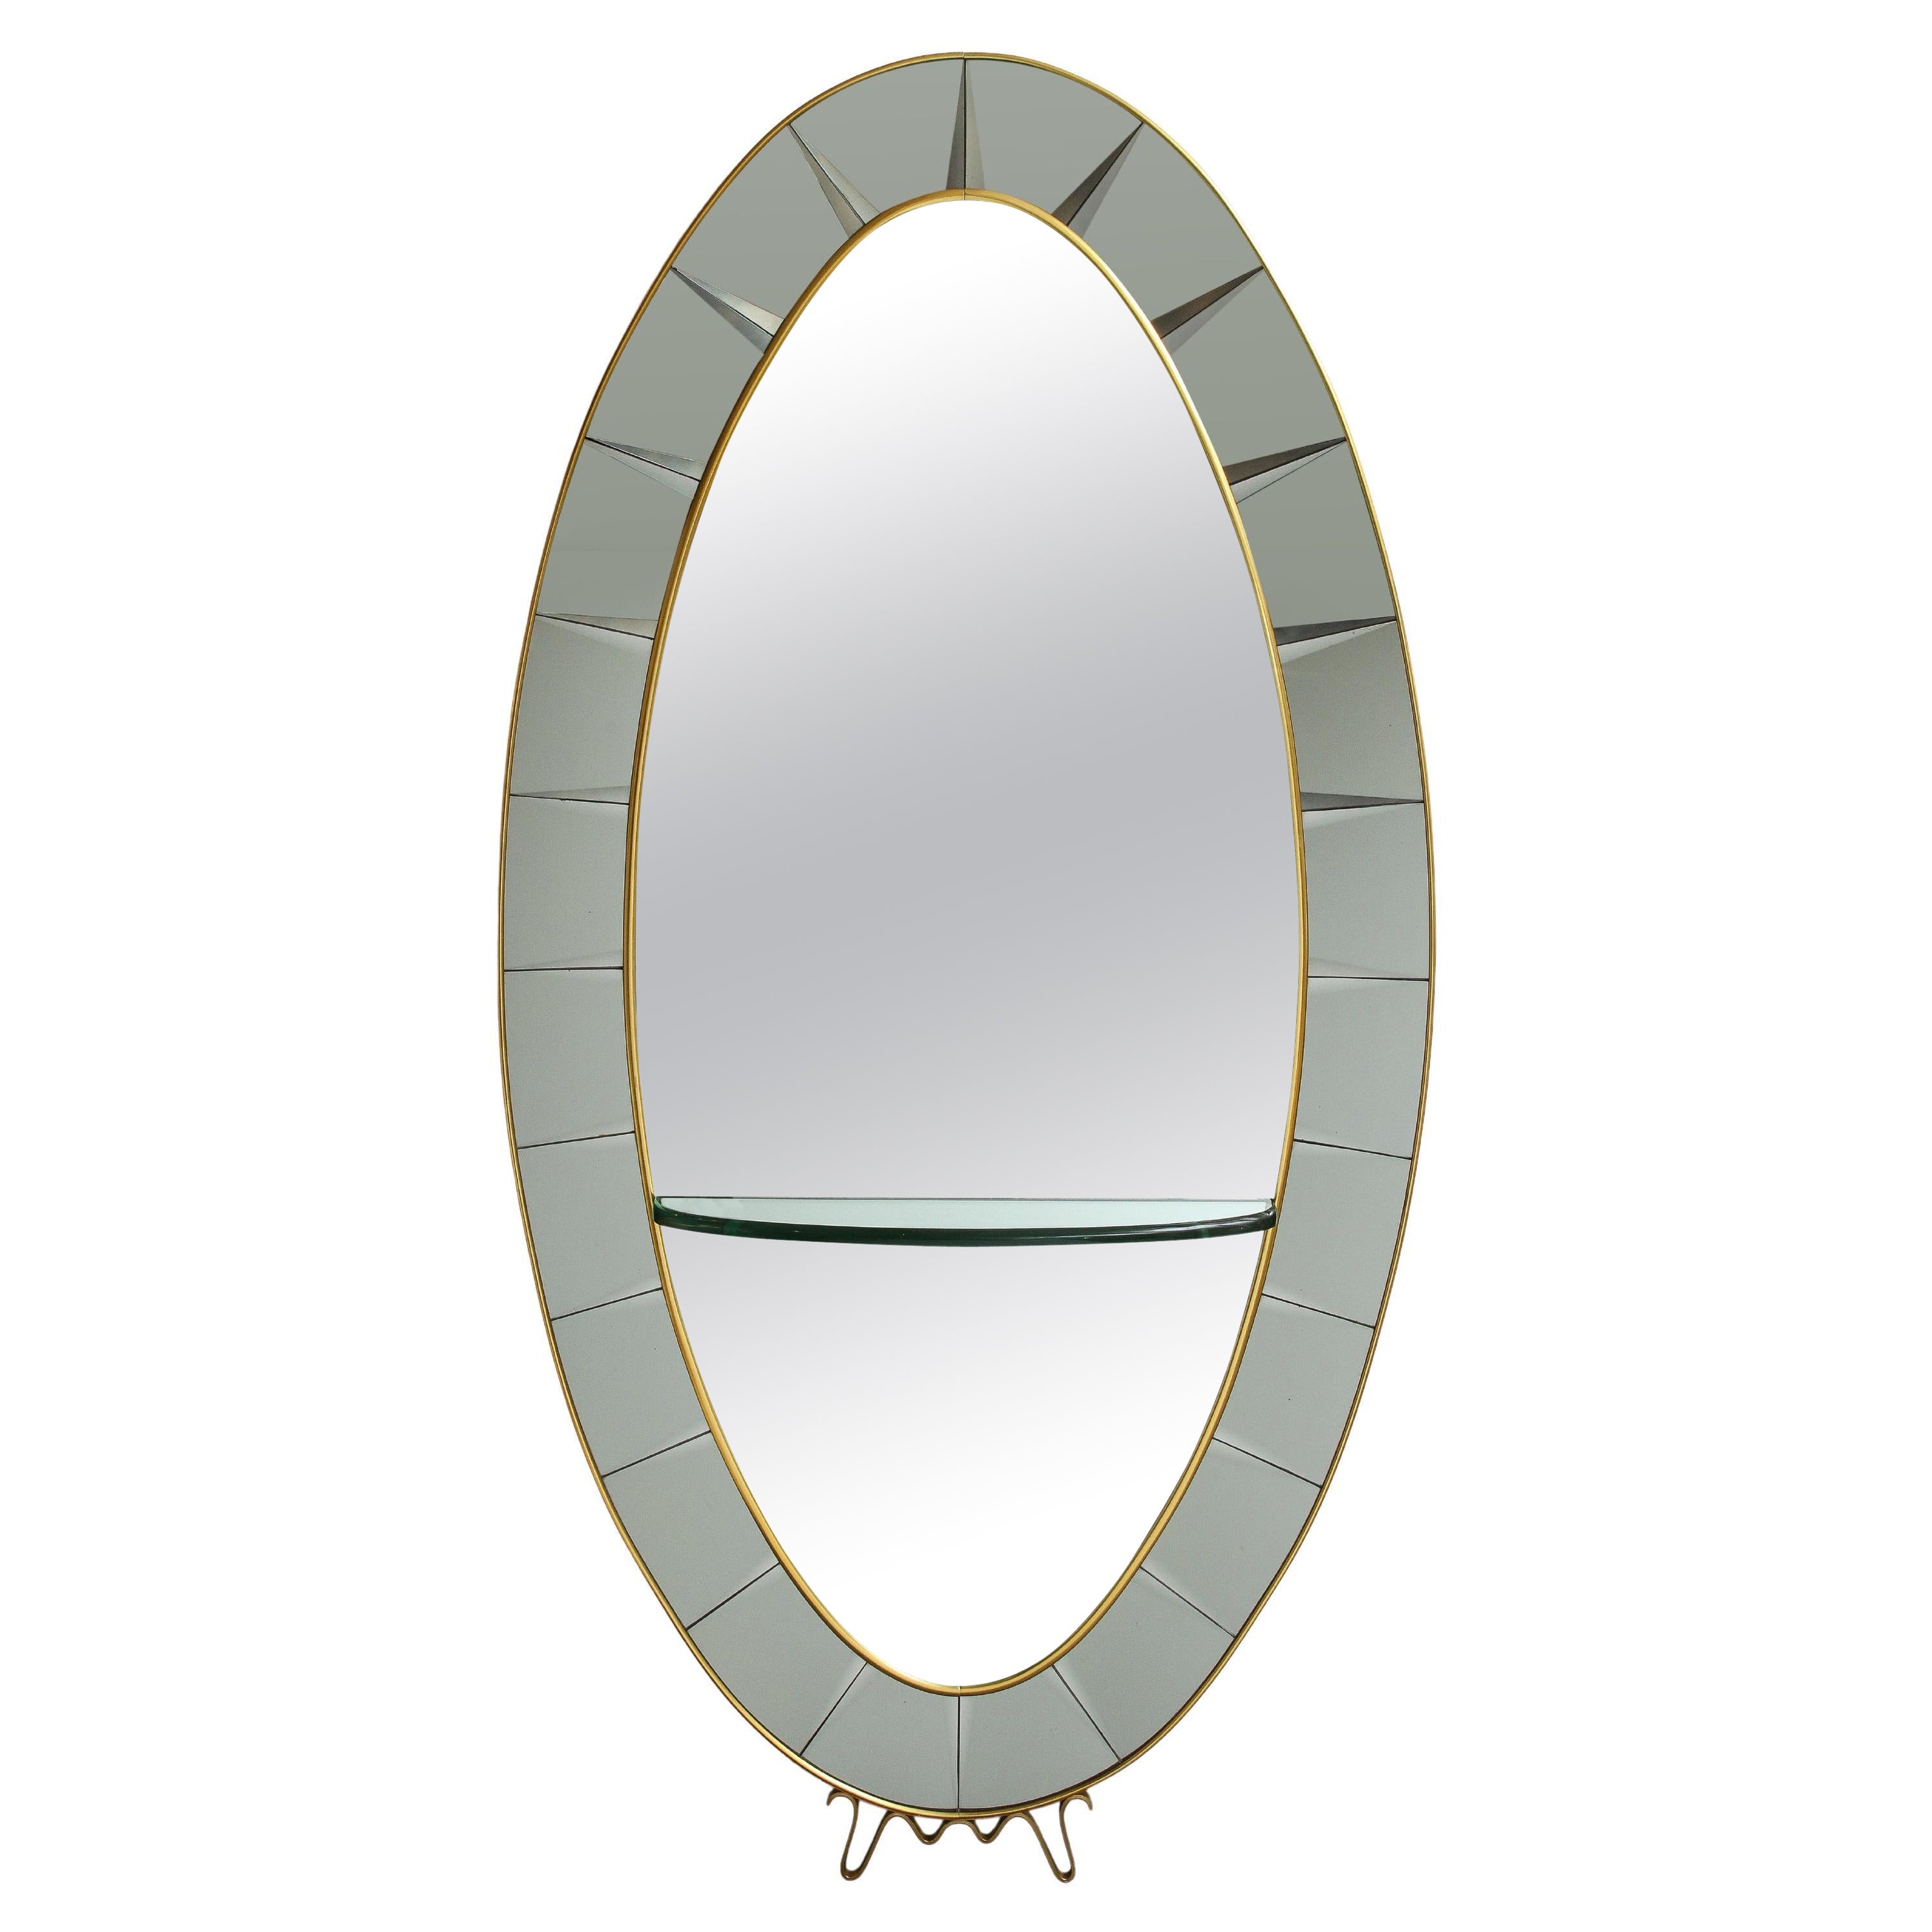 Cristal Art Grand Scale Oval Hand-Cut Beveled Crystal Floor Mirror with Shelf For Sale